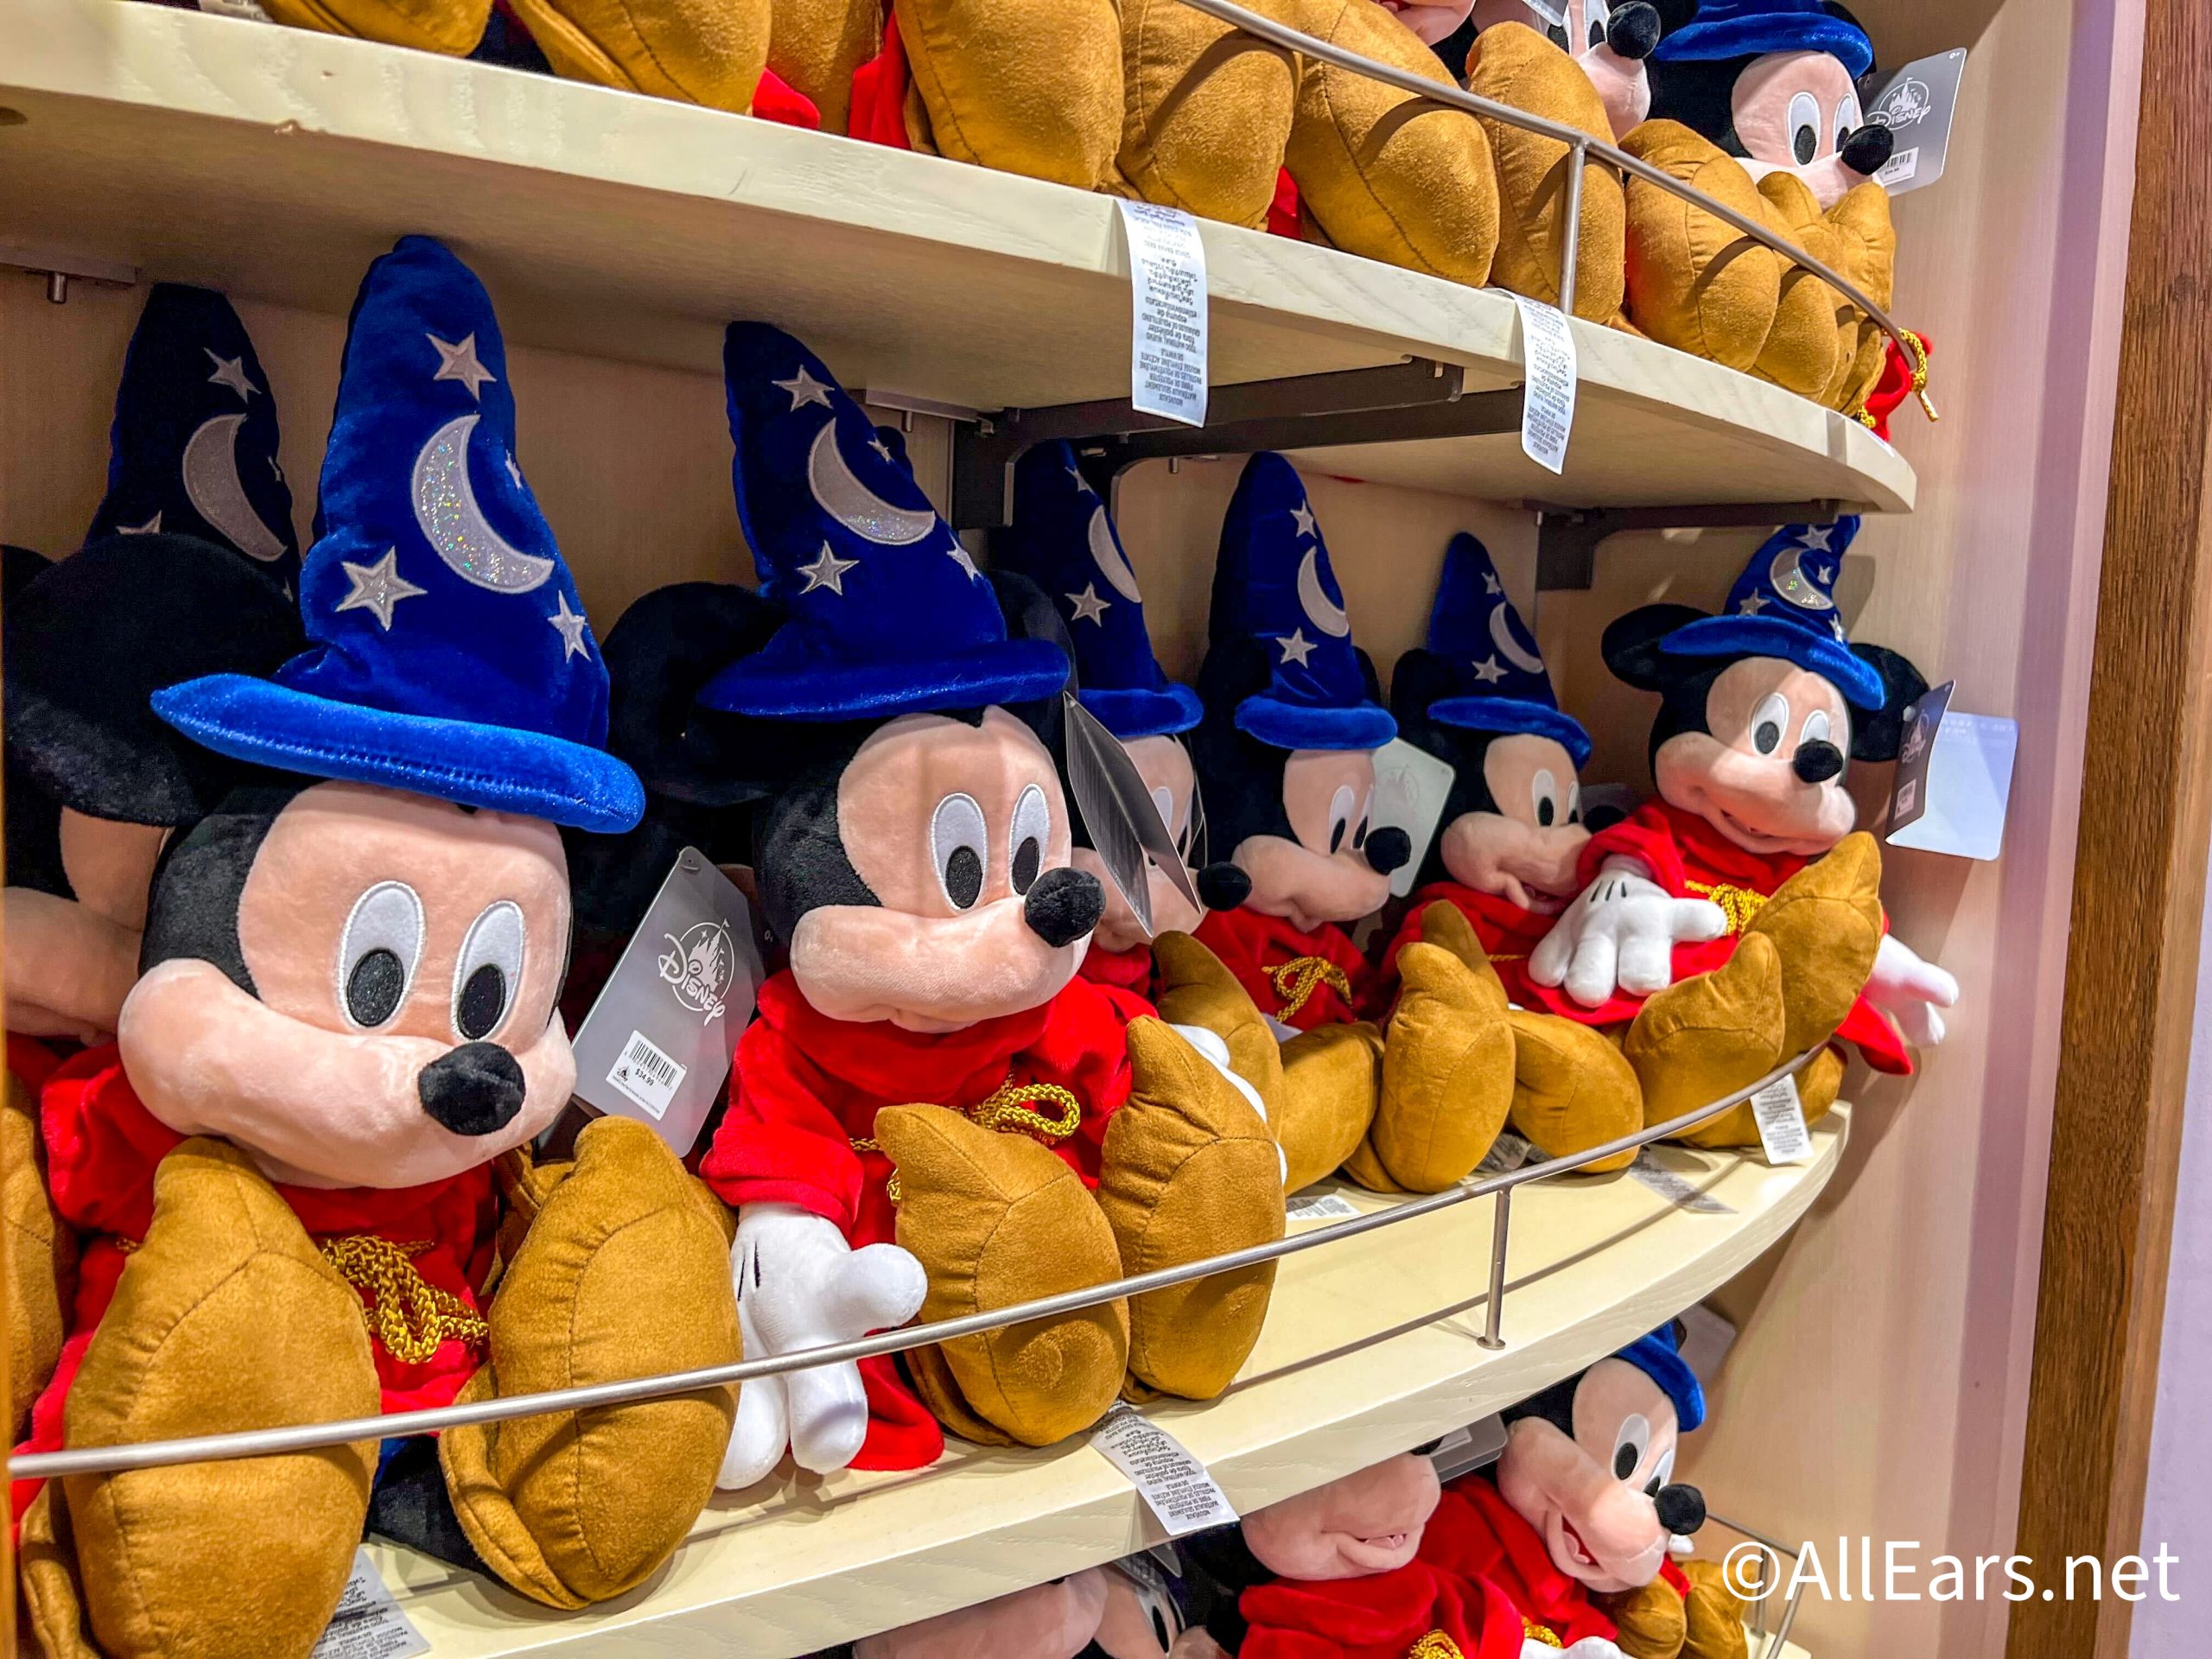 What are your favorite souvenirs from Disney? The DIS